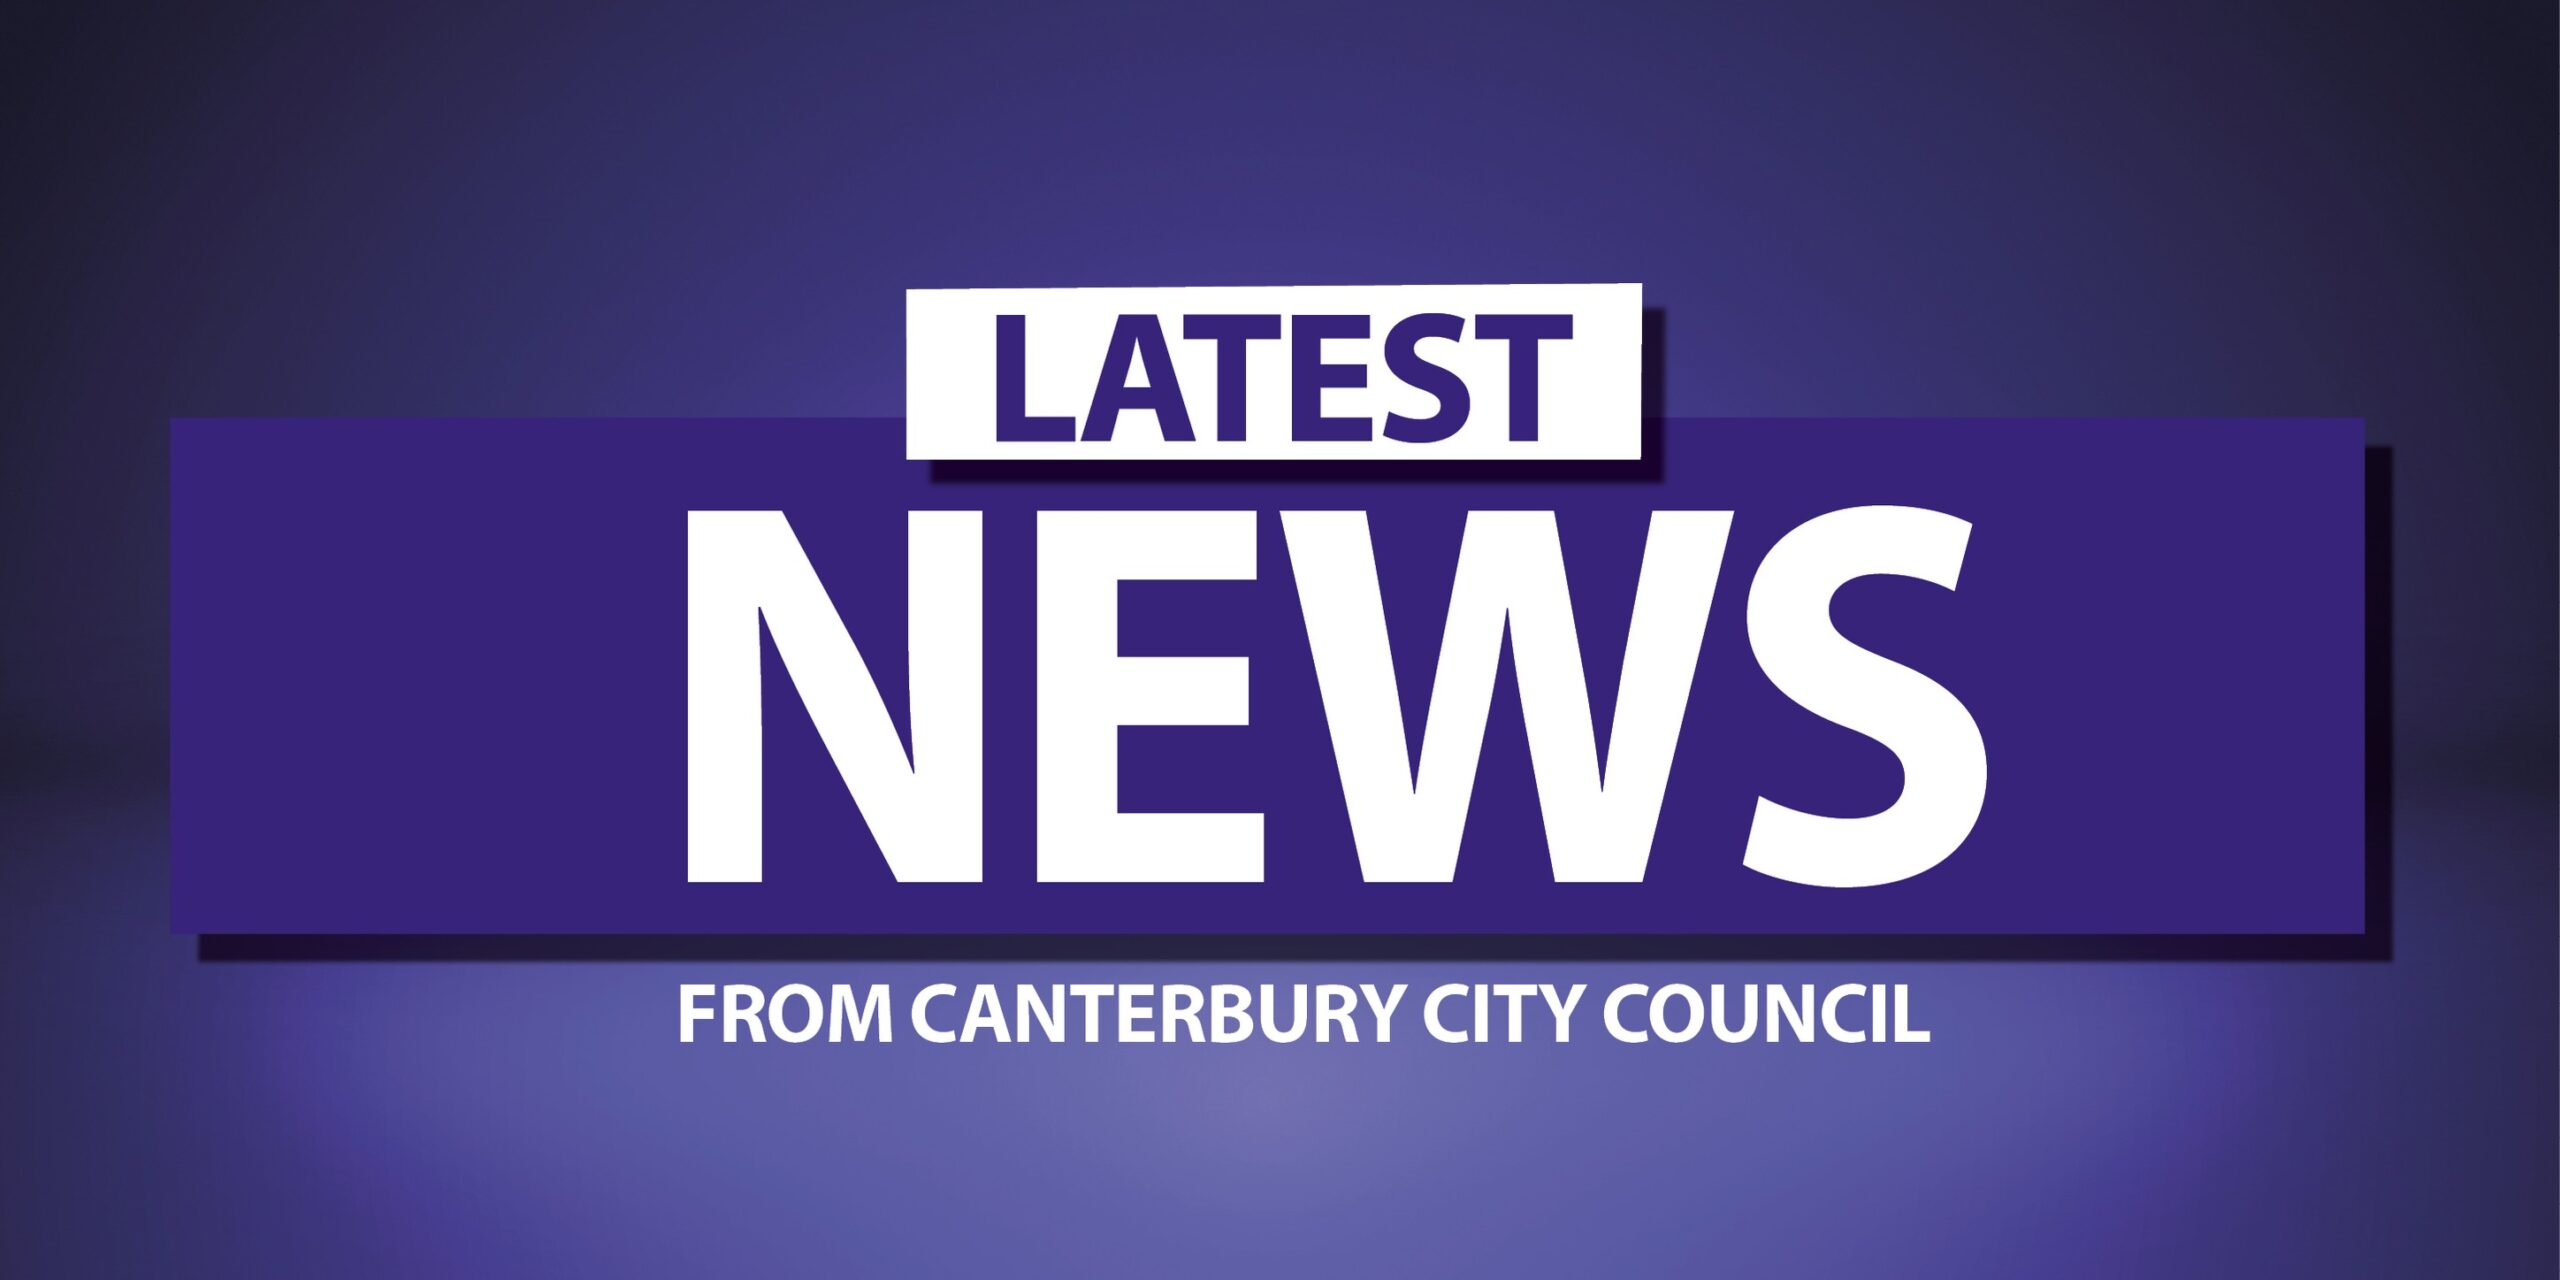 Latest News from Canterbury City Council